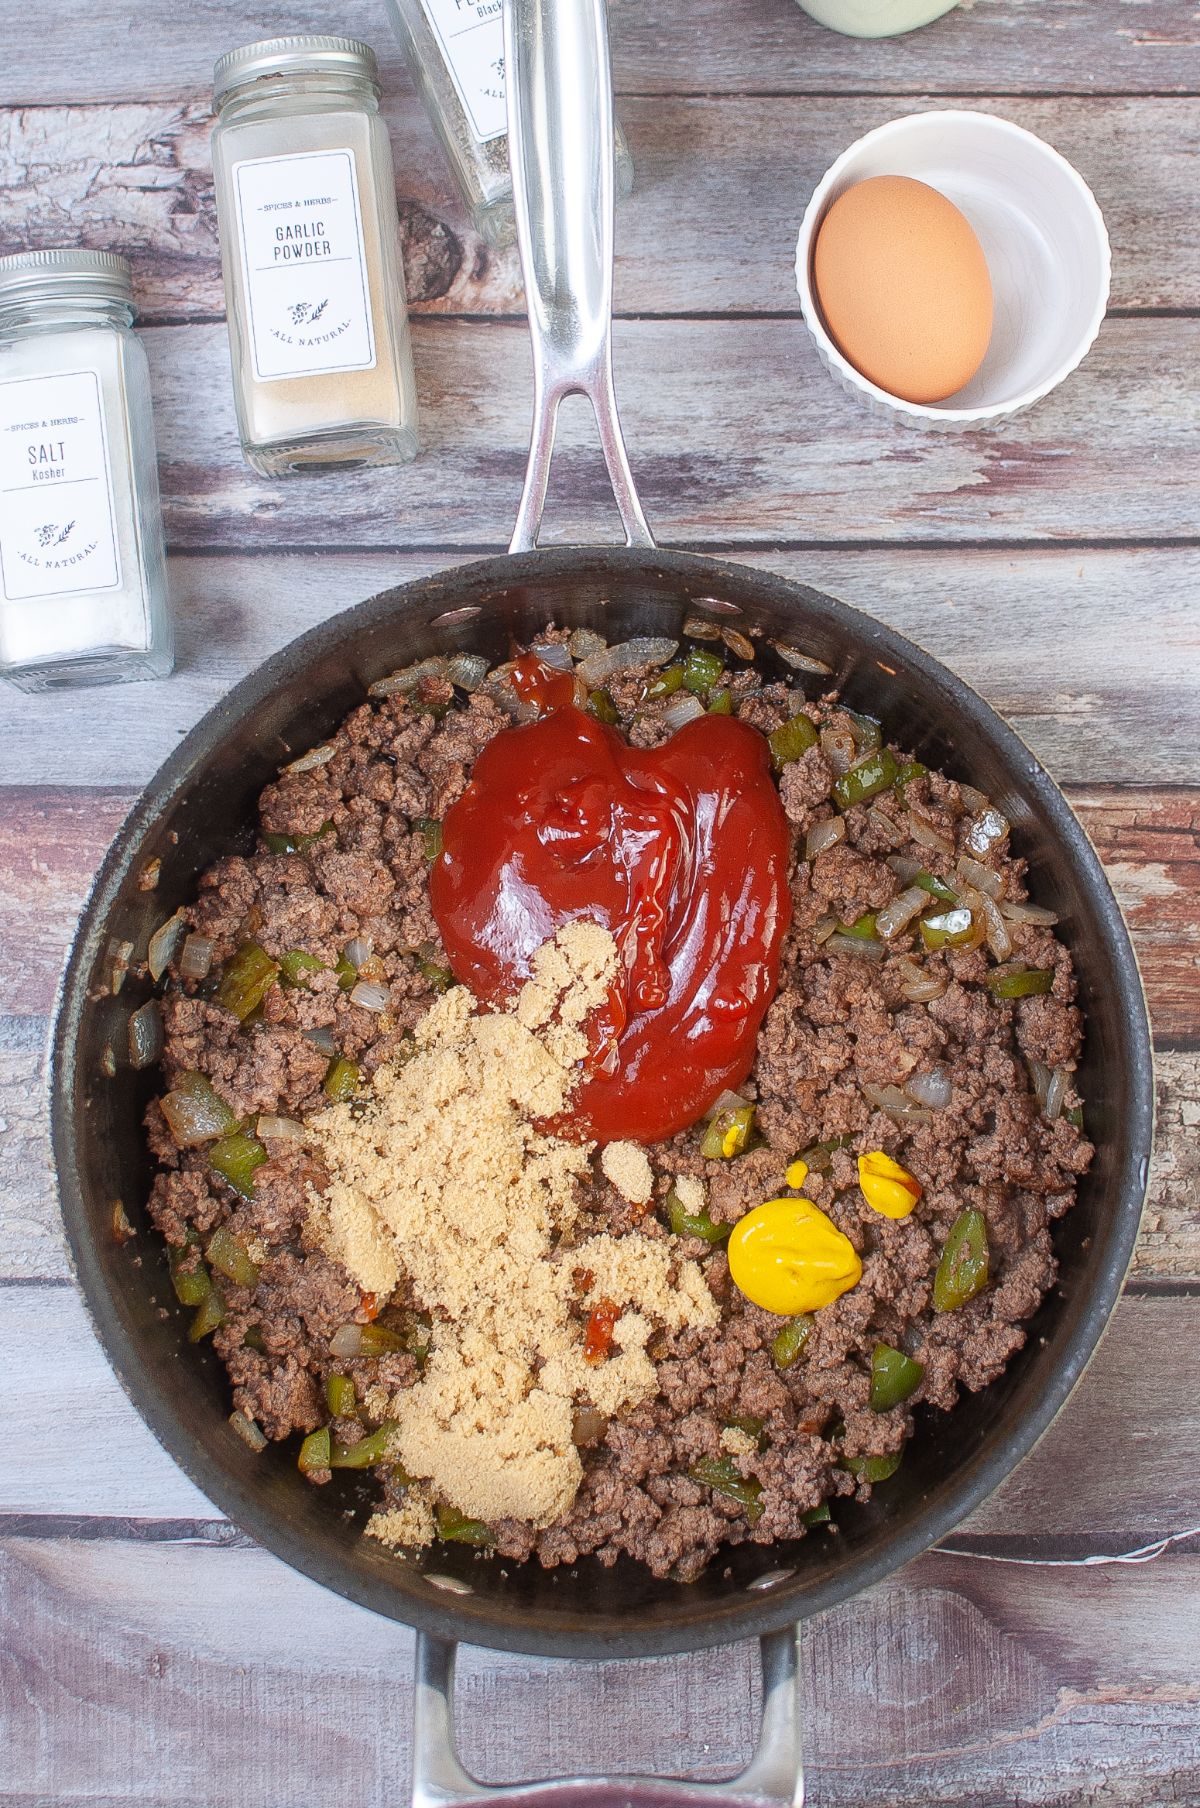 The mustard, brown sugar, and ketchup are being added to the meat mixture in the pan.